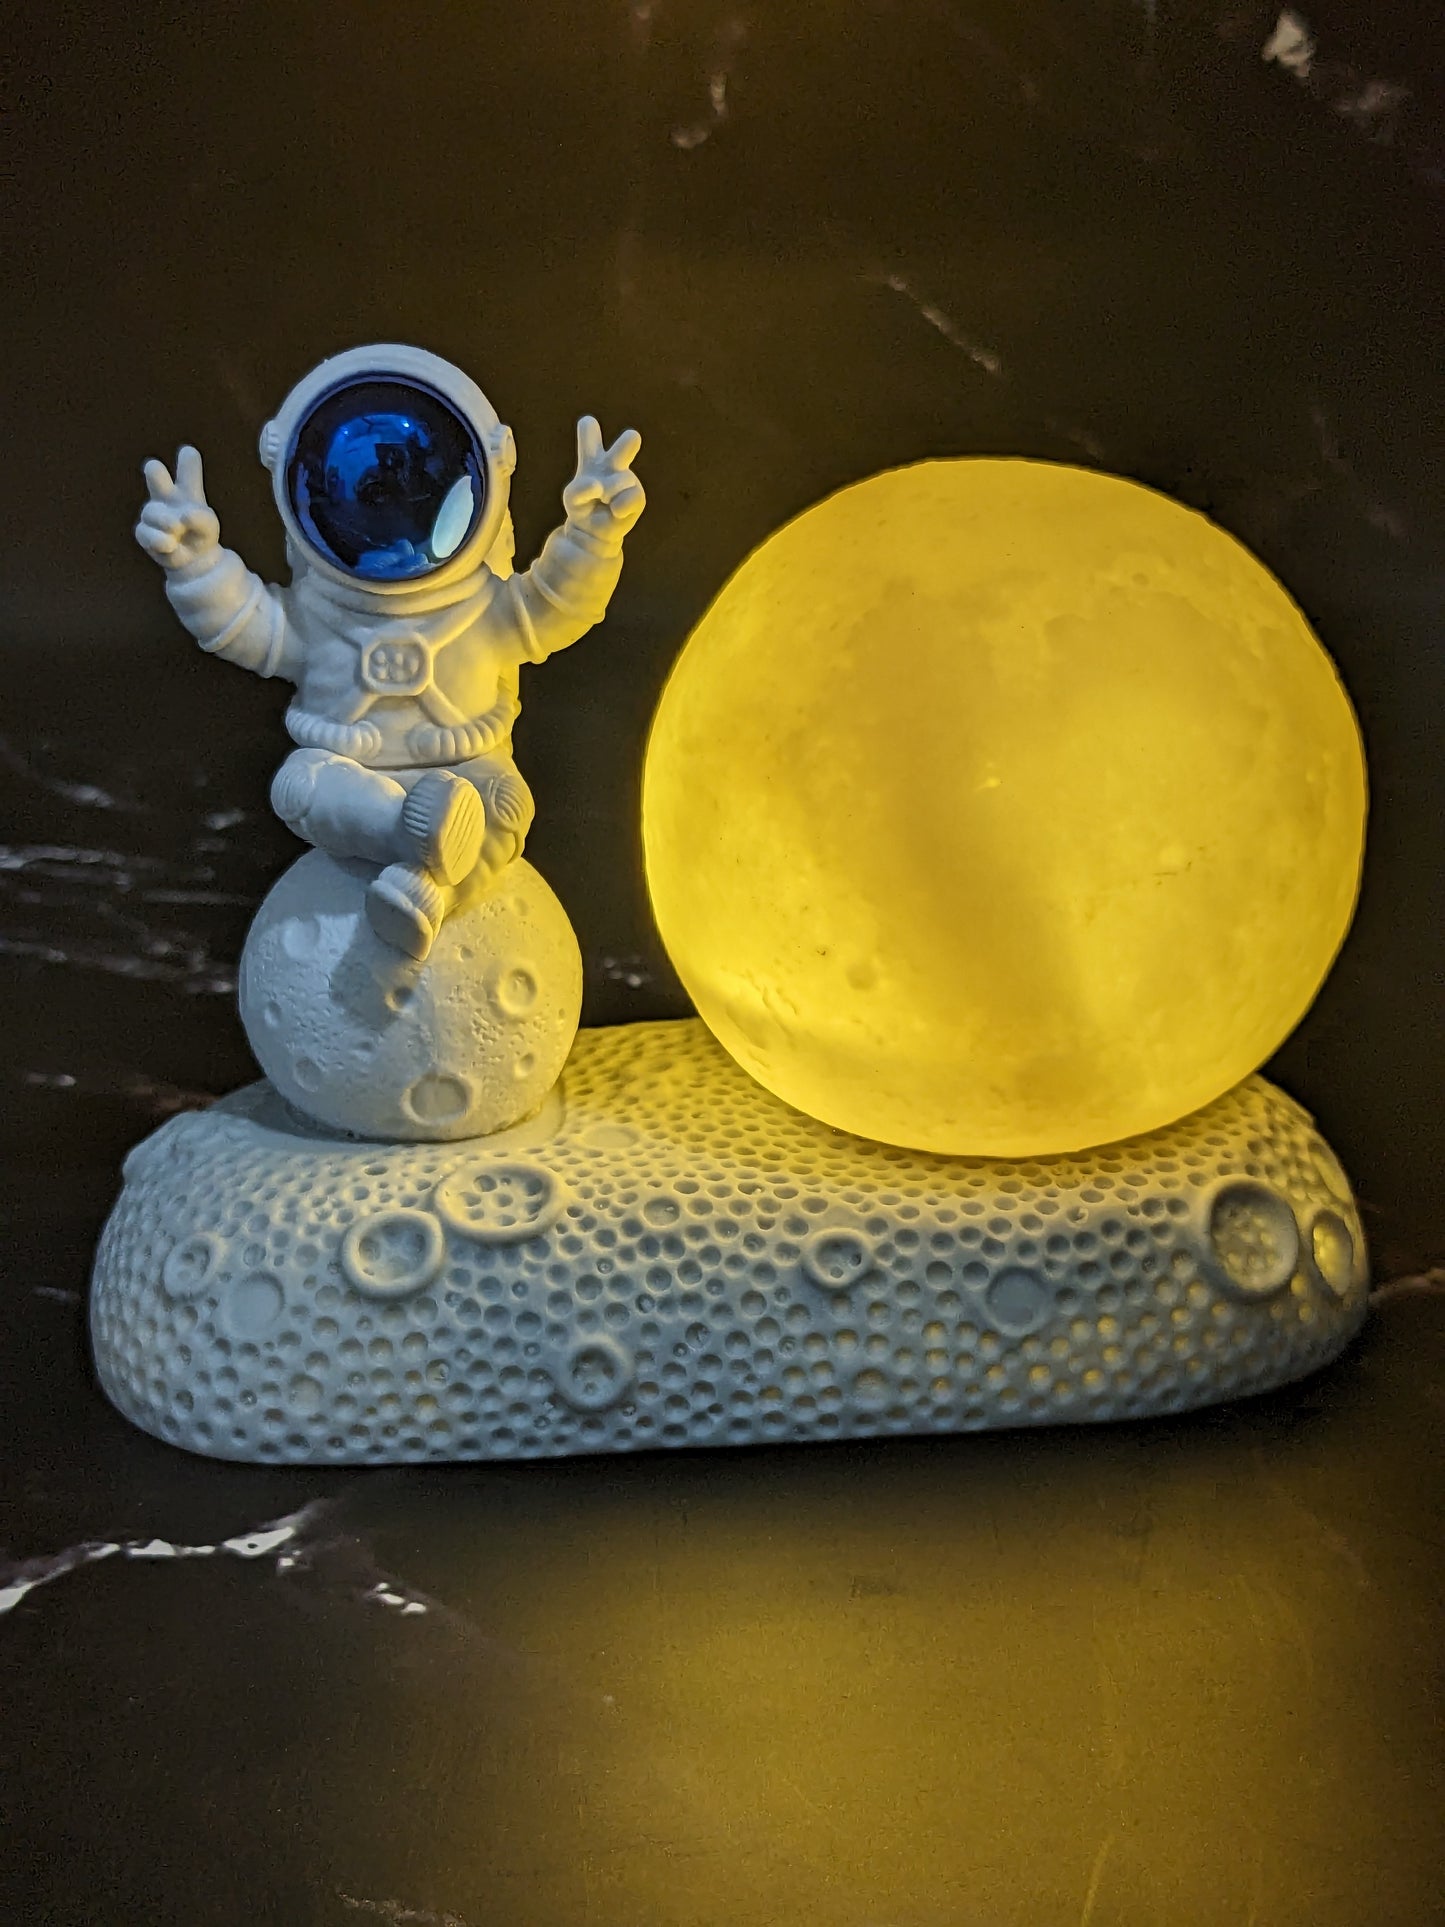 Astronaut Moon Night Light, Cute Bedside Table Lamp, Spaceman Statue, Charming Home / Bedroom Decor, Best Gift for Kids - (12x6x10 cm)